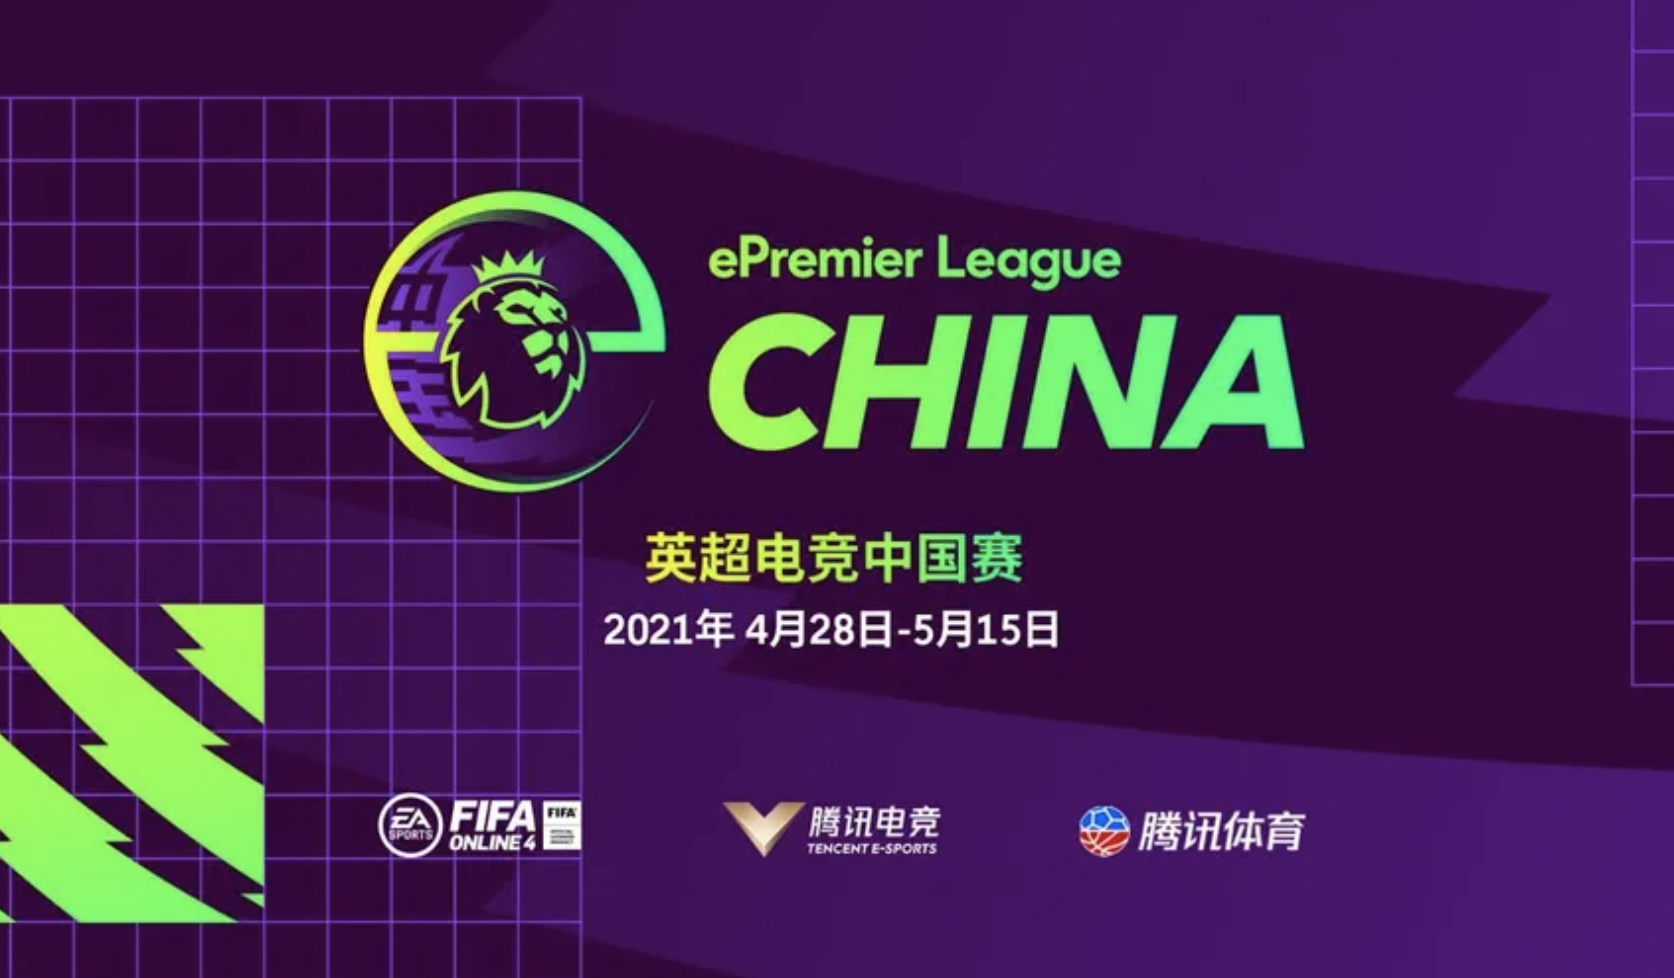 ePremier League to debut in China with Tencent. Clubs repped by local talent